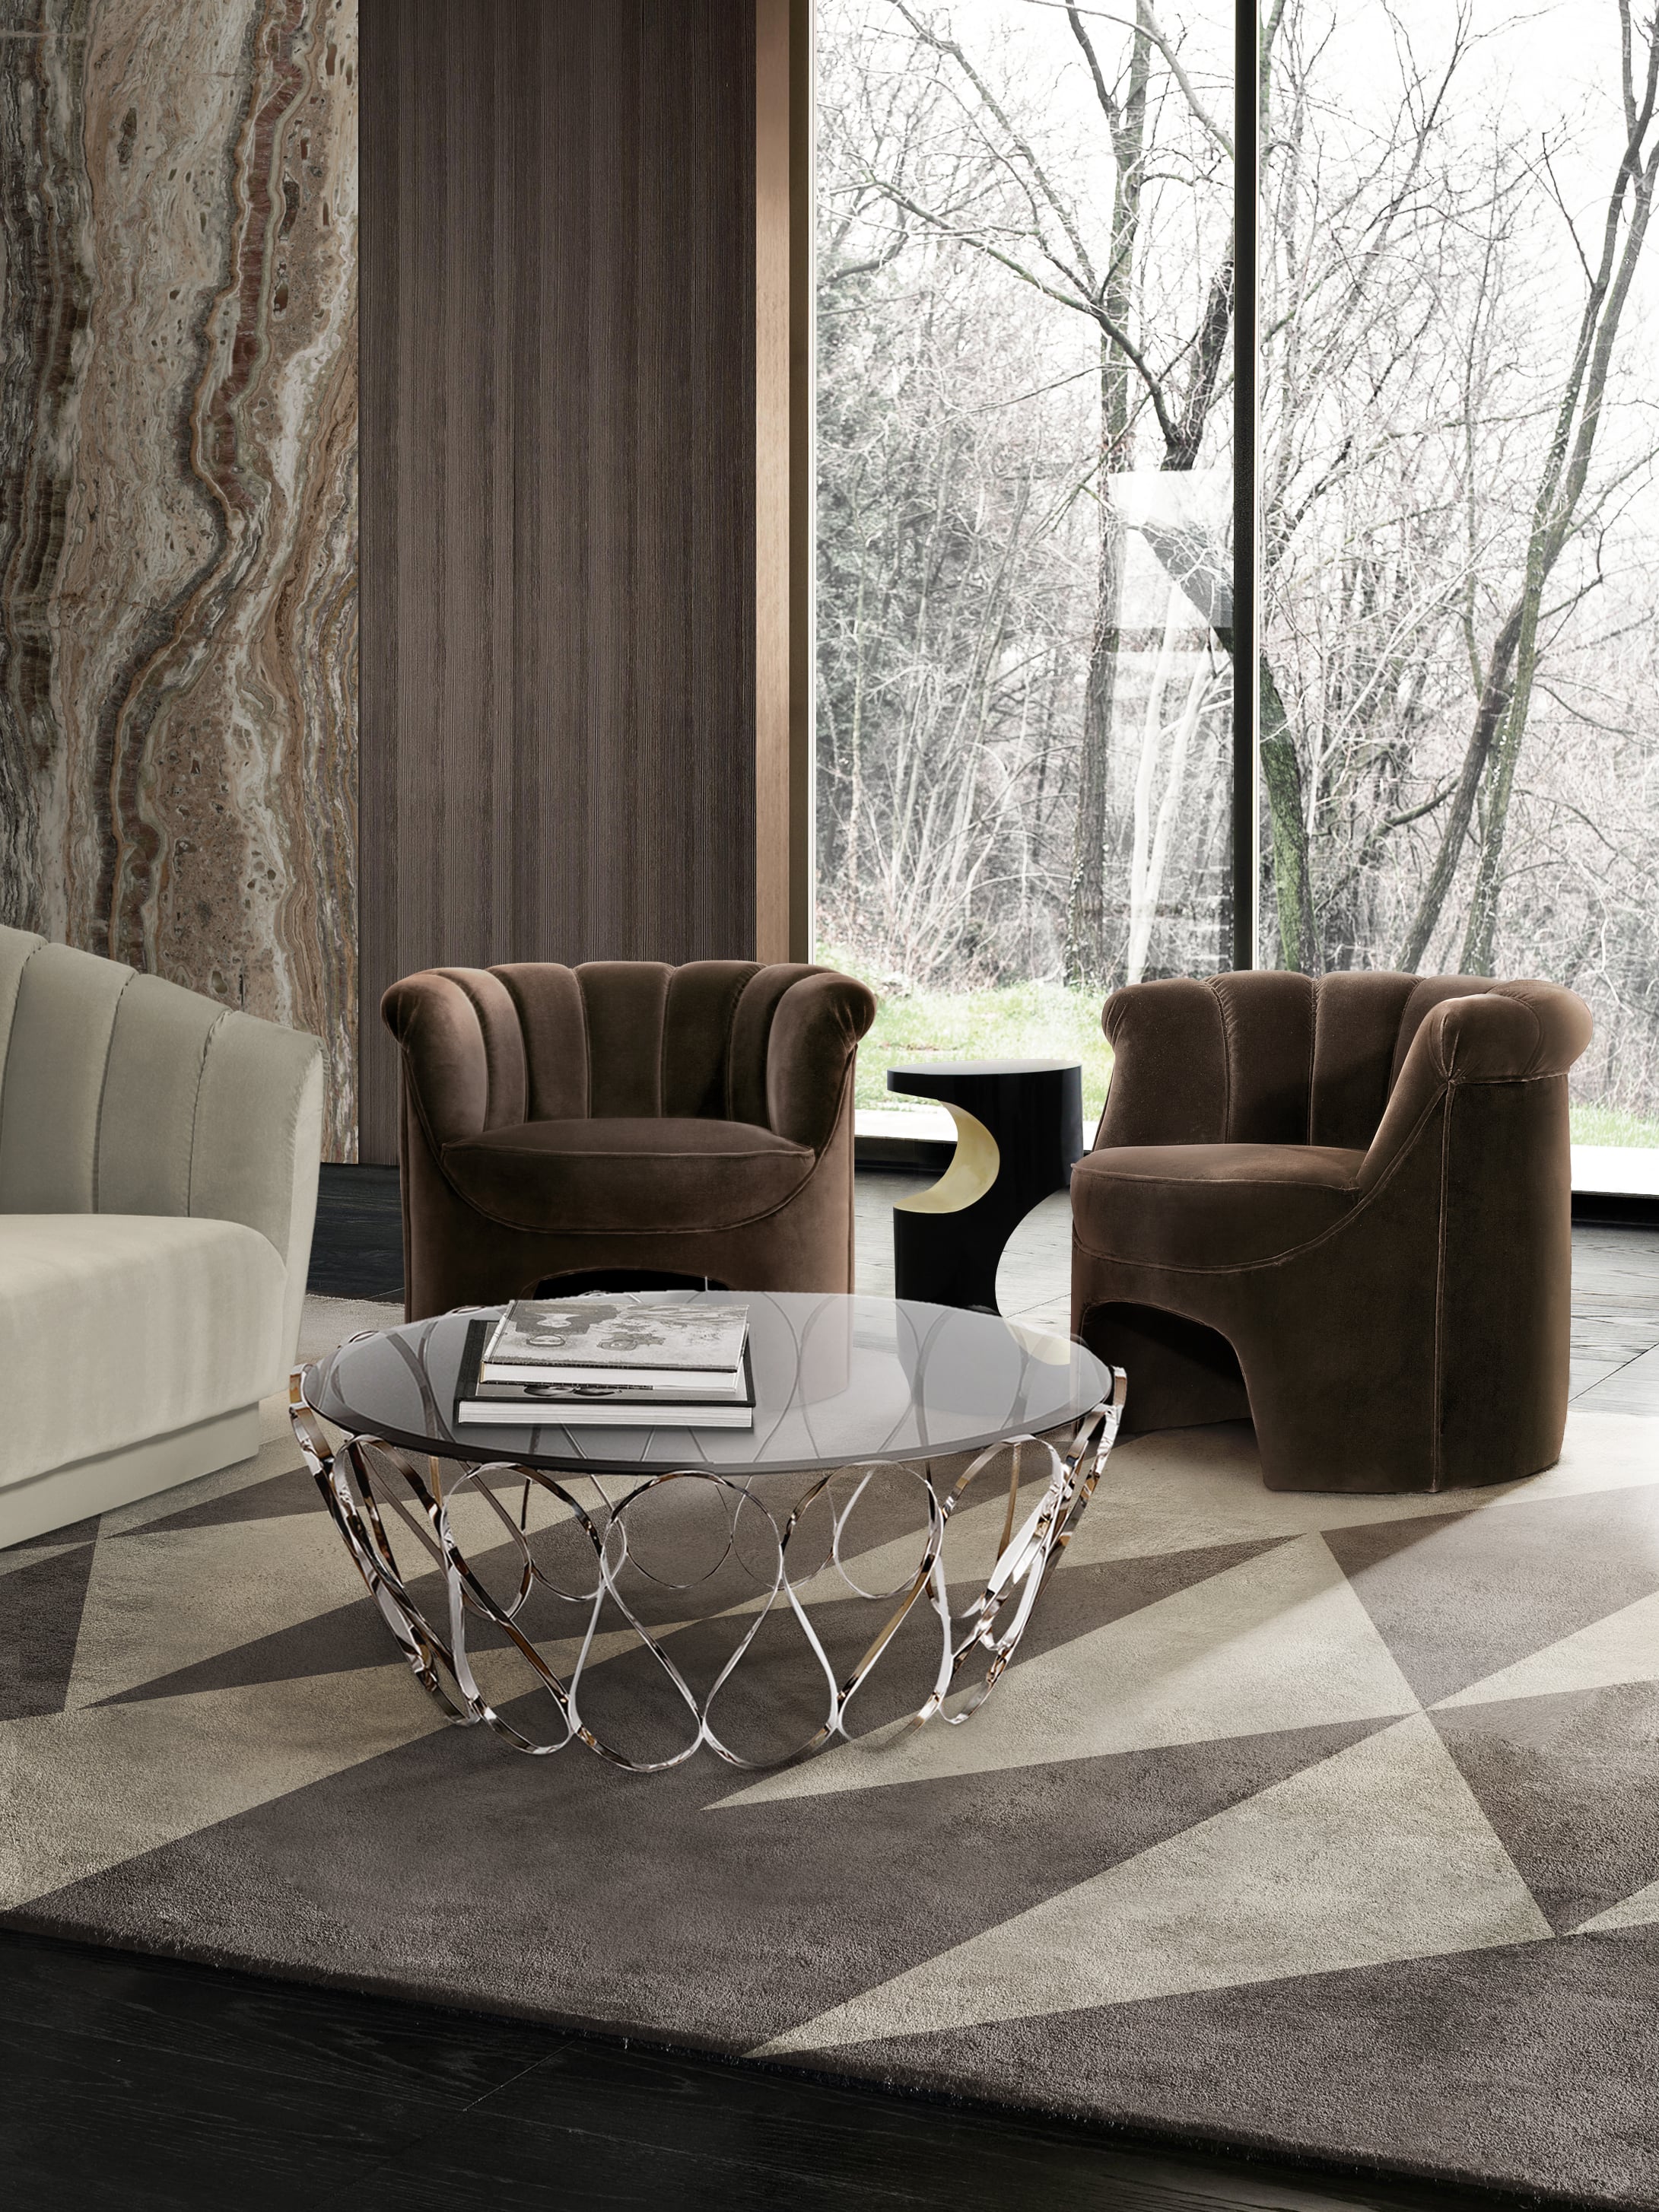 Contemporary Living Room Decor In Brown Tones And Outstanding Textures - Home'Society